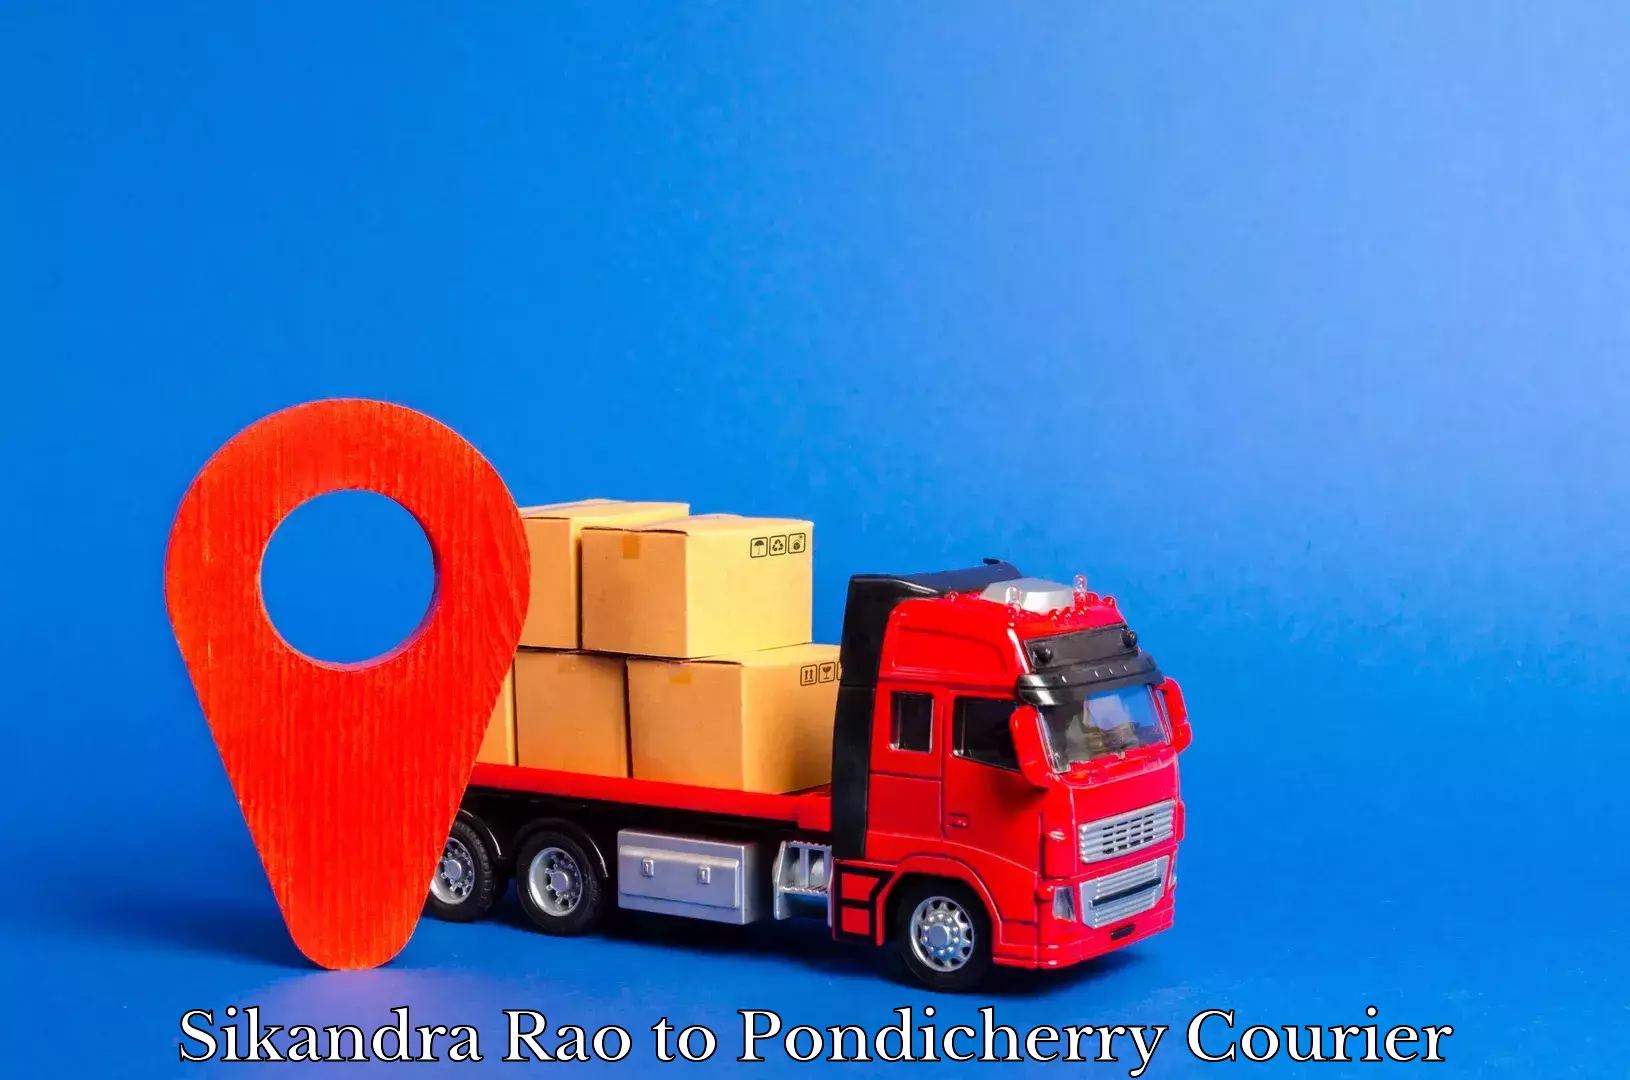 Global shipping networks in Sikandra Rao to Pondicherry